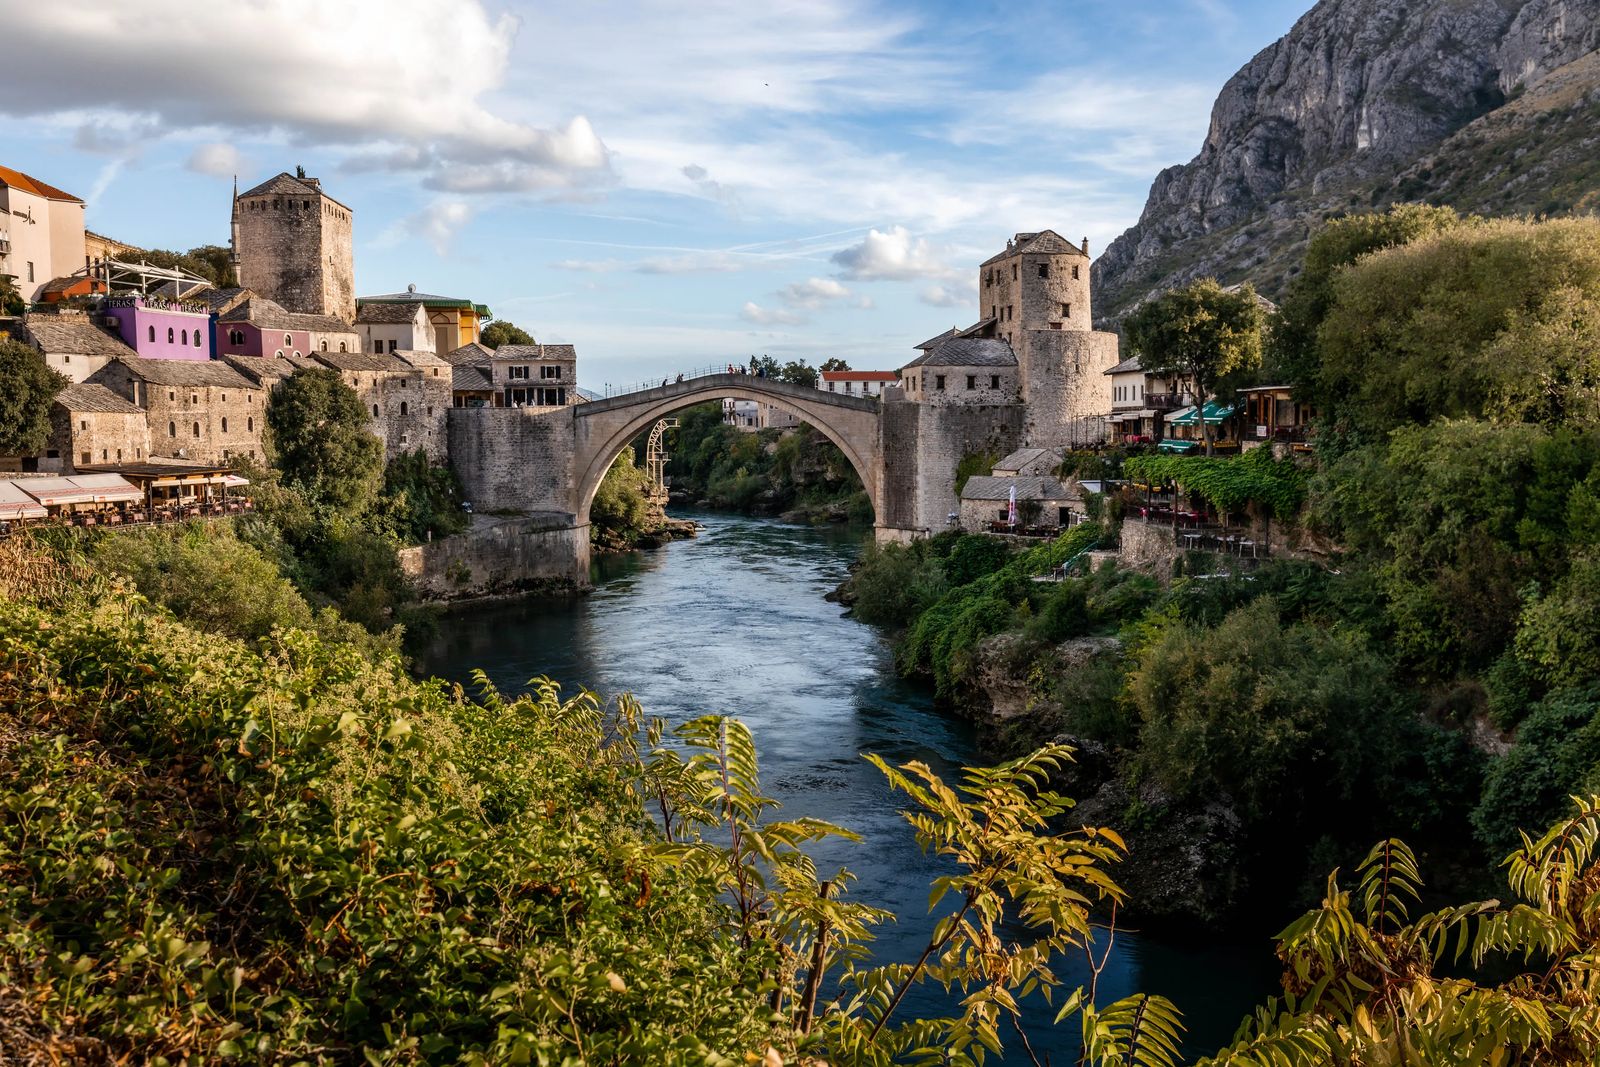 One Day In Mostar Bosnia - Start Most from Mosque